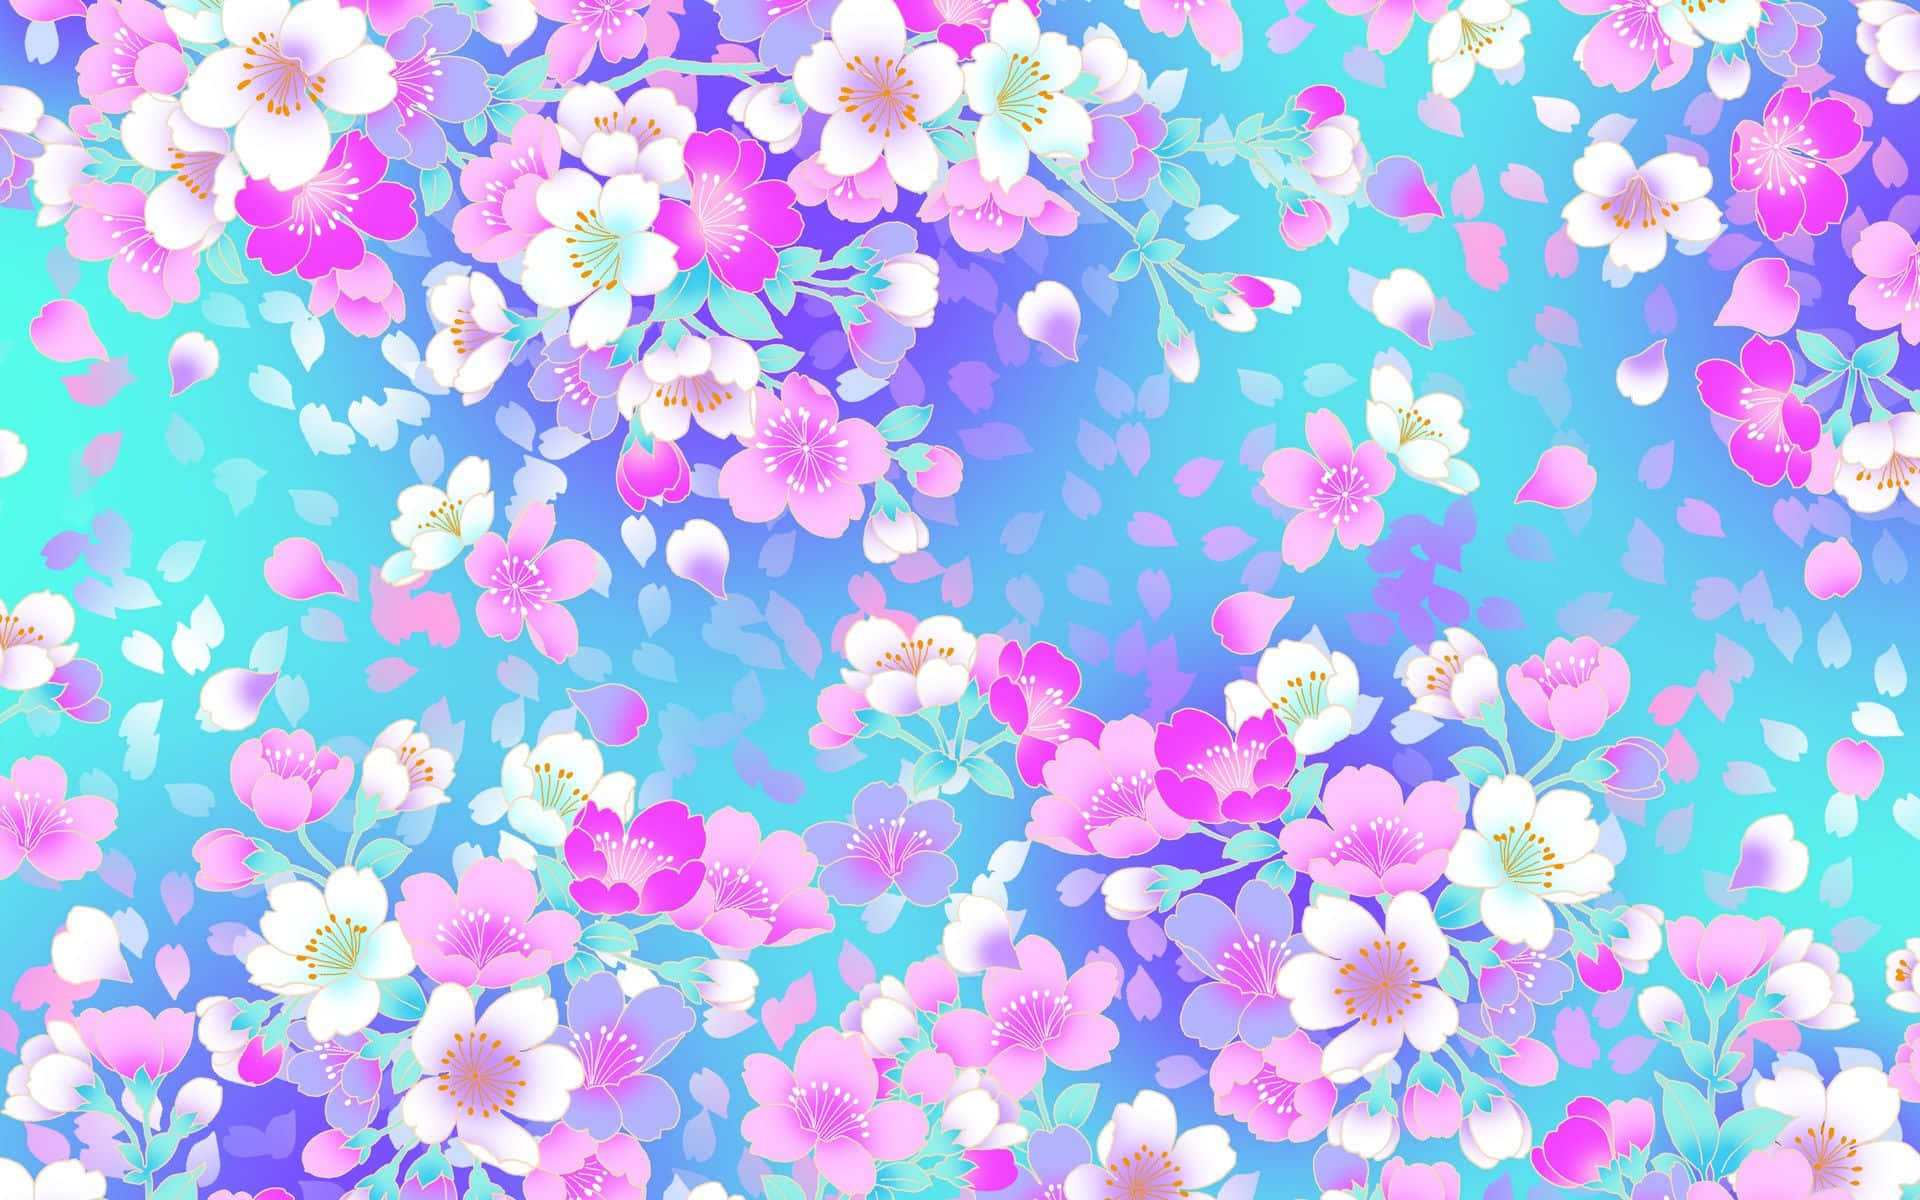 Girly Tumblr Cherry Blossom Petals Background